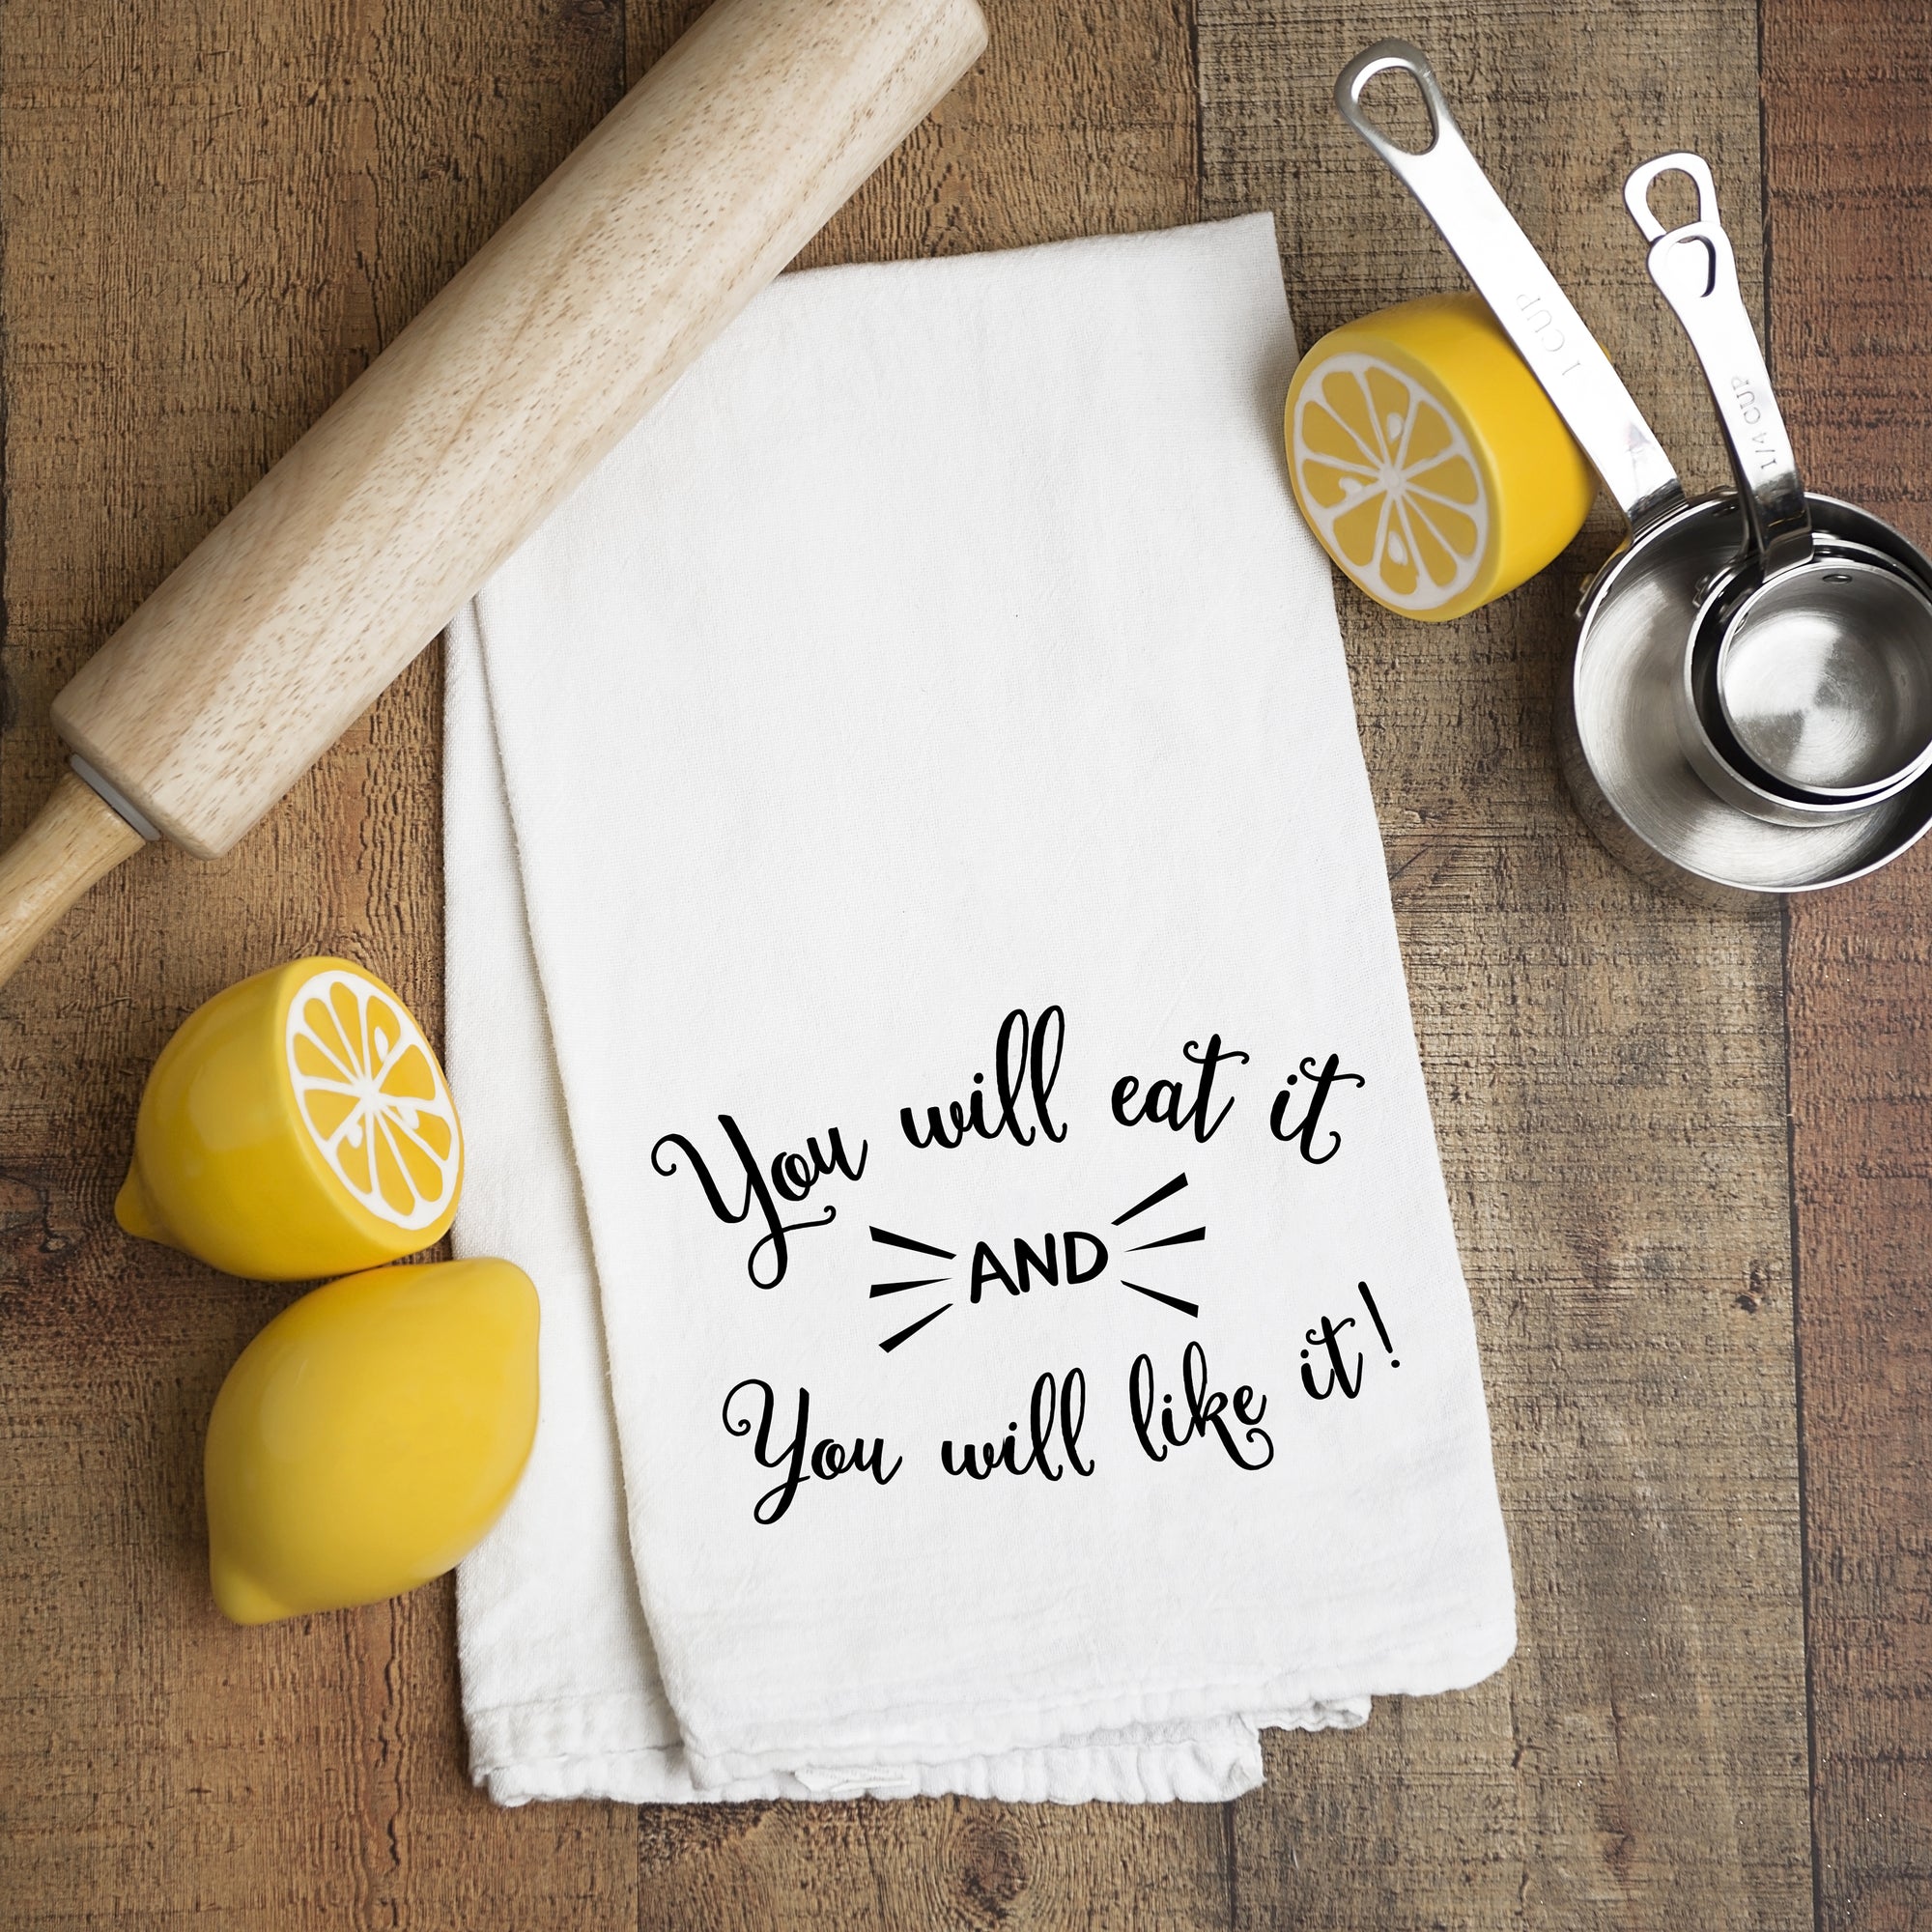 You will eat it AND you will like it Tea Towel